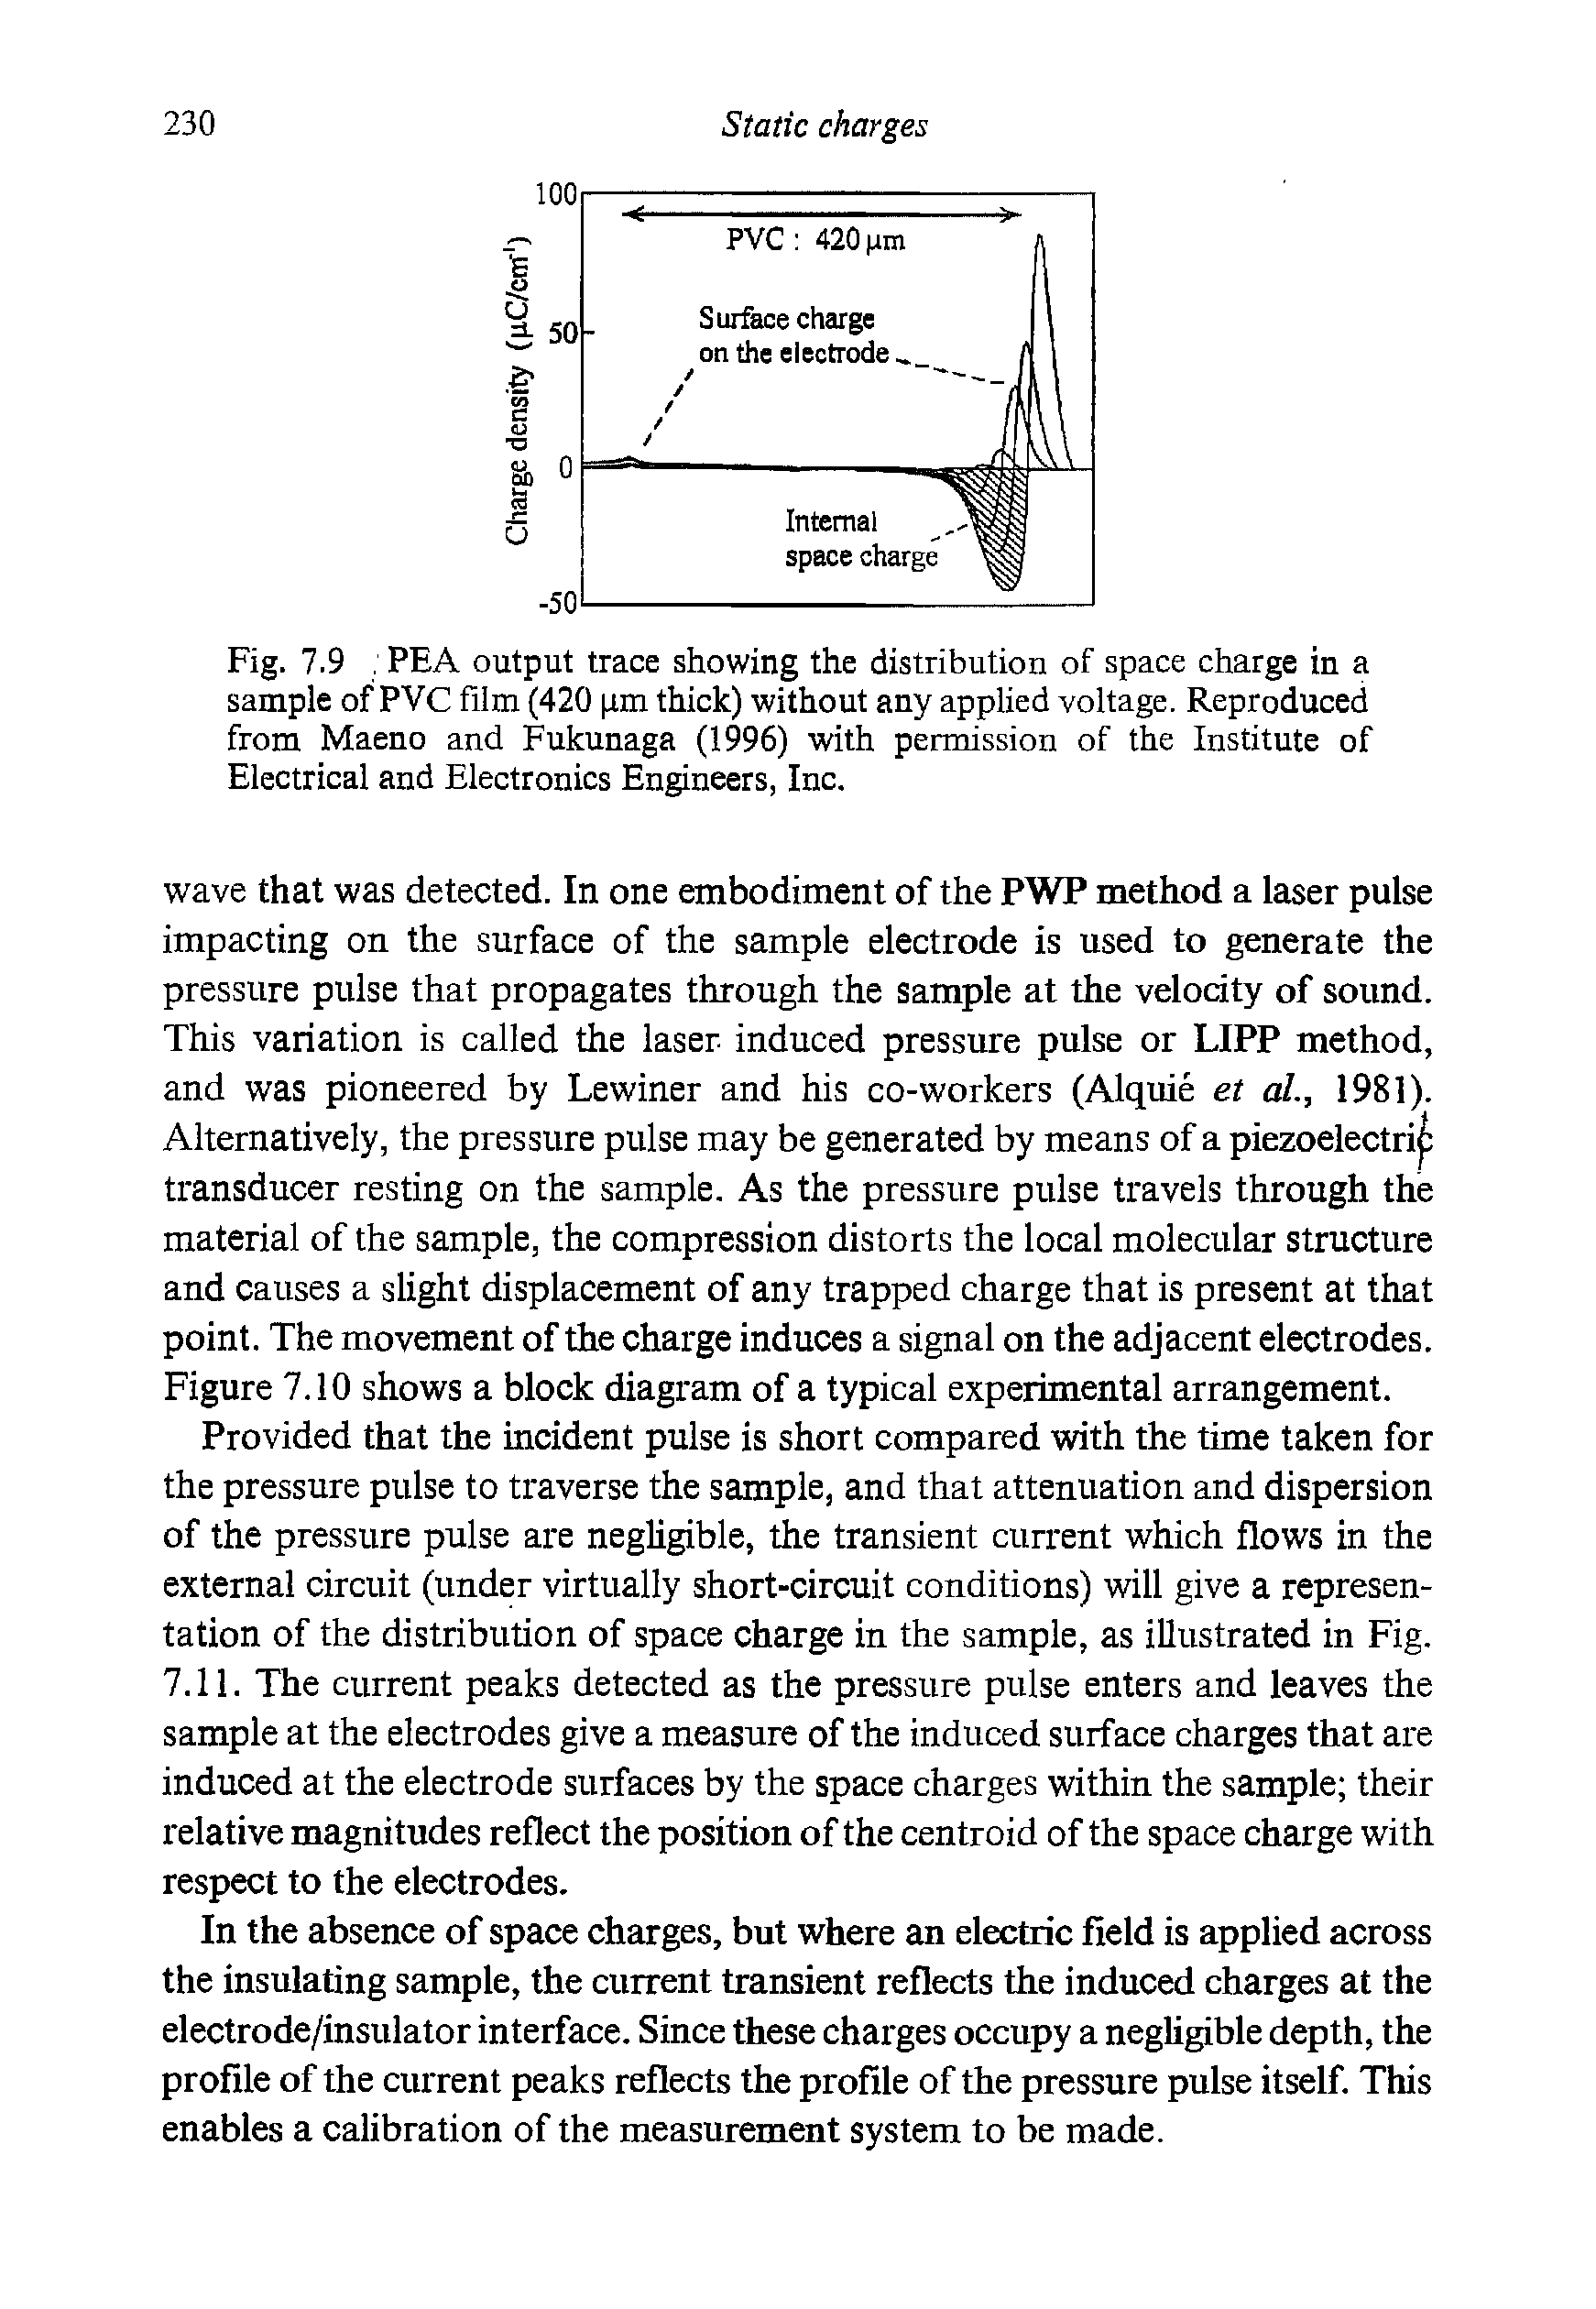 Fig. 7.9. PEA output trace showing the distribution of space charge in a sample of PVC film (420 pm thick) without any applied voltage. Reproduced from Maeno and Fukunaga (1996) with permission of the Institute of Electrical and Electronics Engineers, Inc.